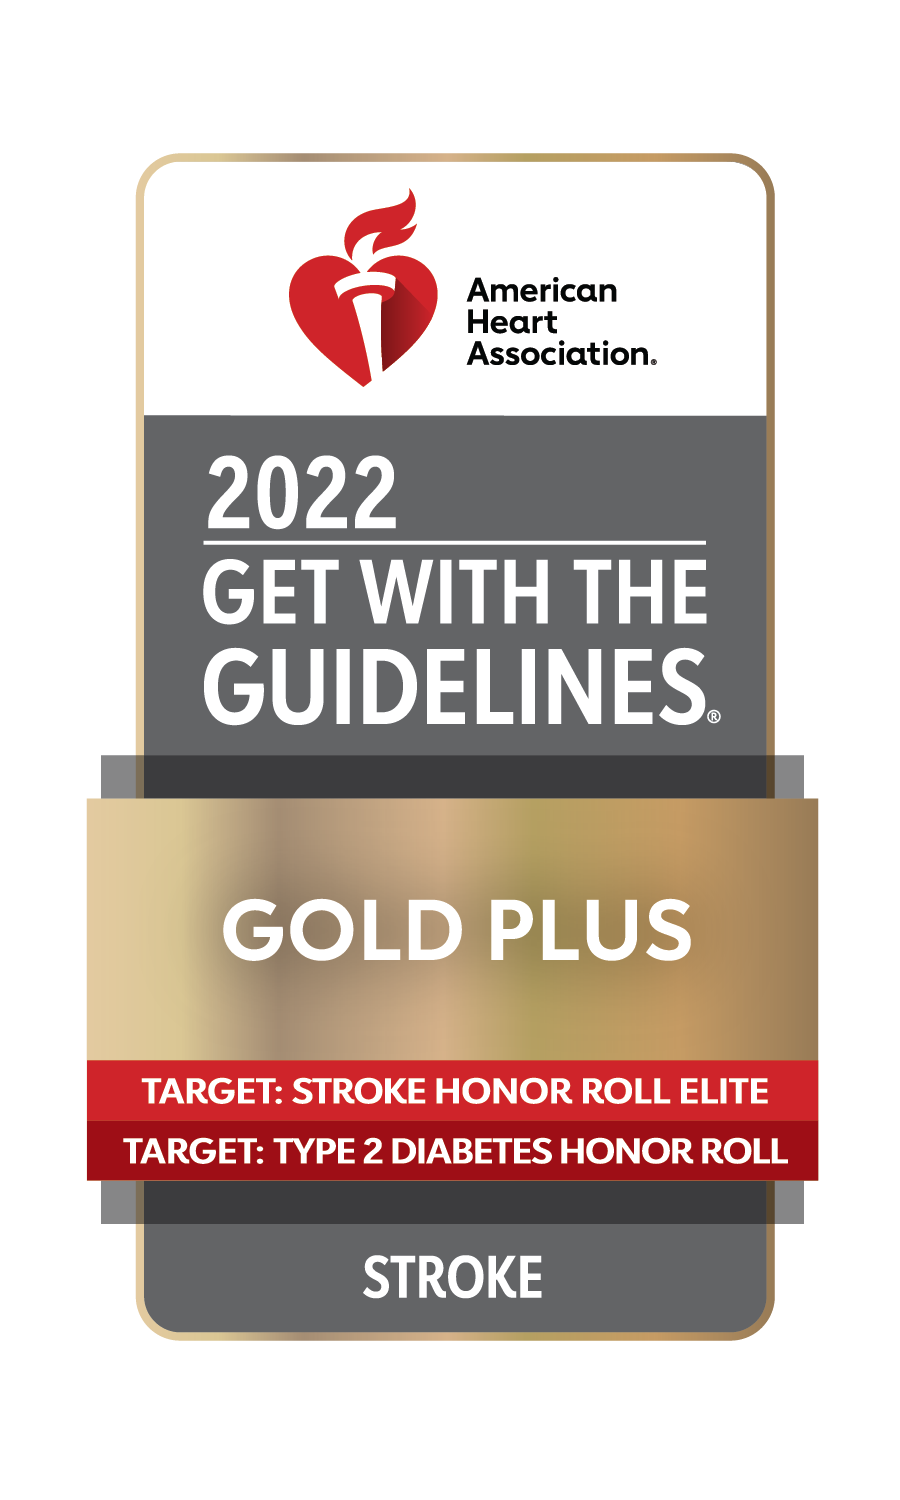 2022 GWTG Gold Plus with Target: Stroke Elite and Target: Diabetes Honor Rolls